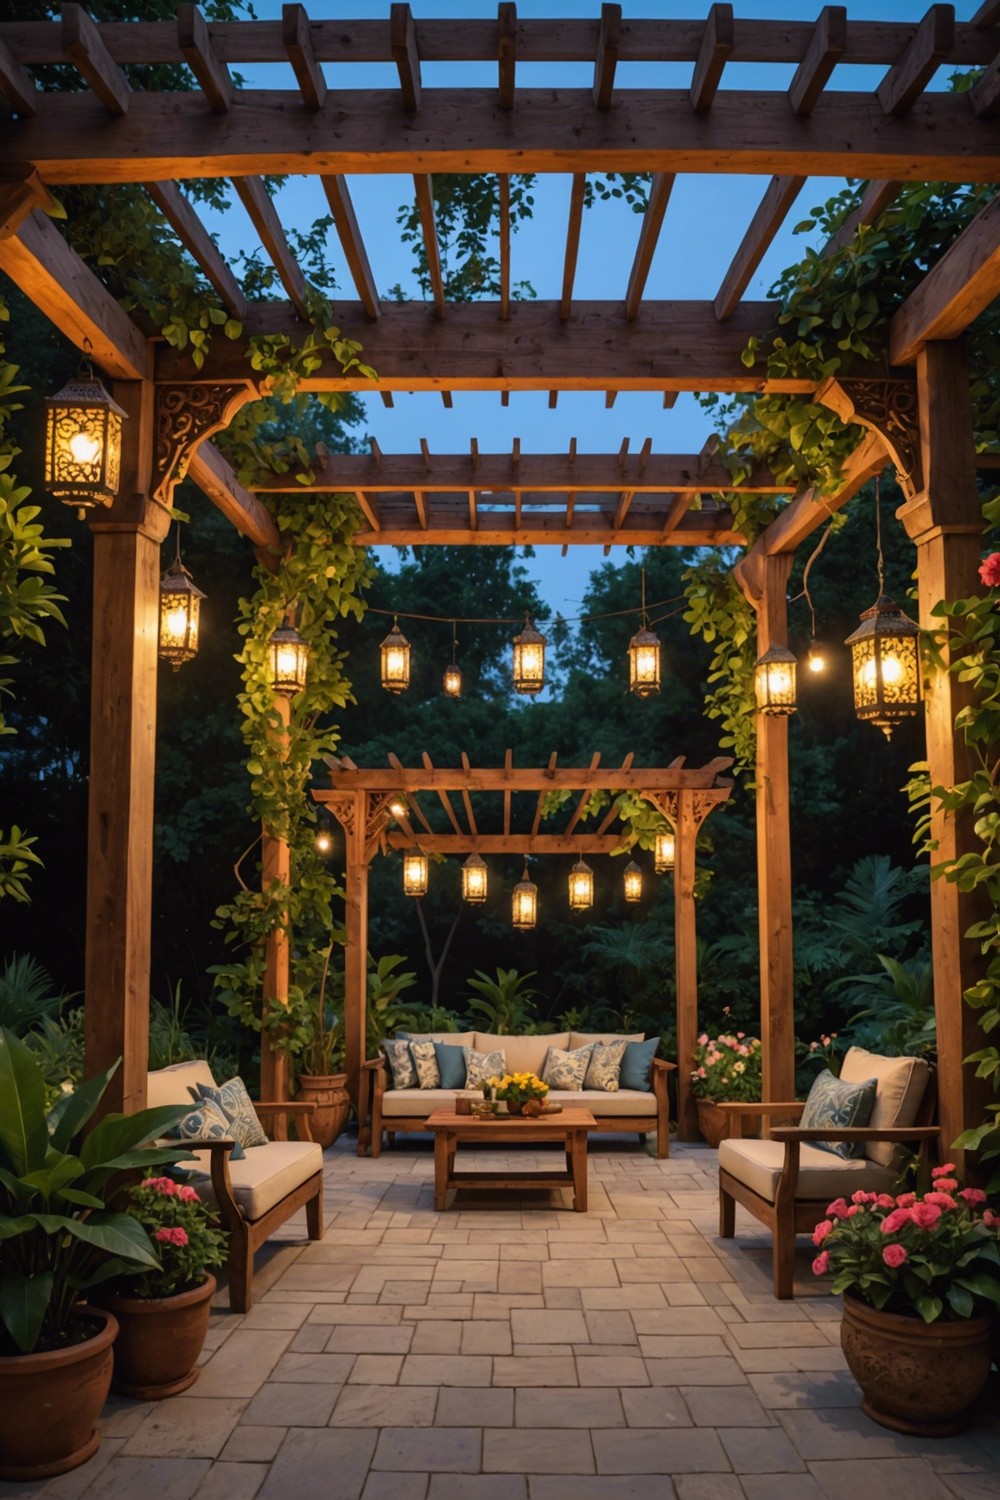 Wooden Pergola with Carved Designs and Lanterns